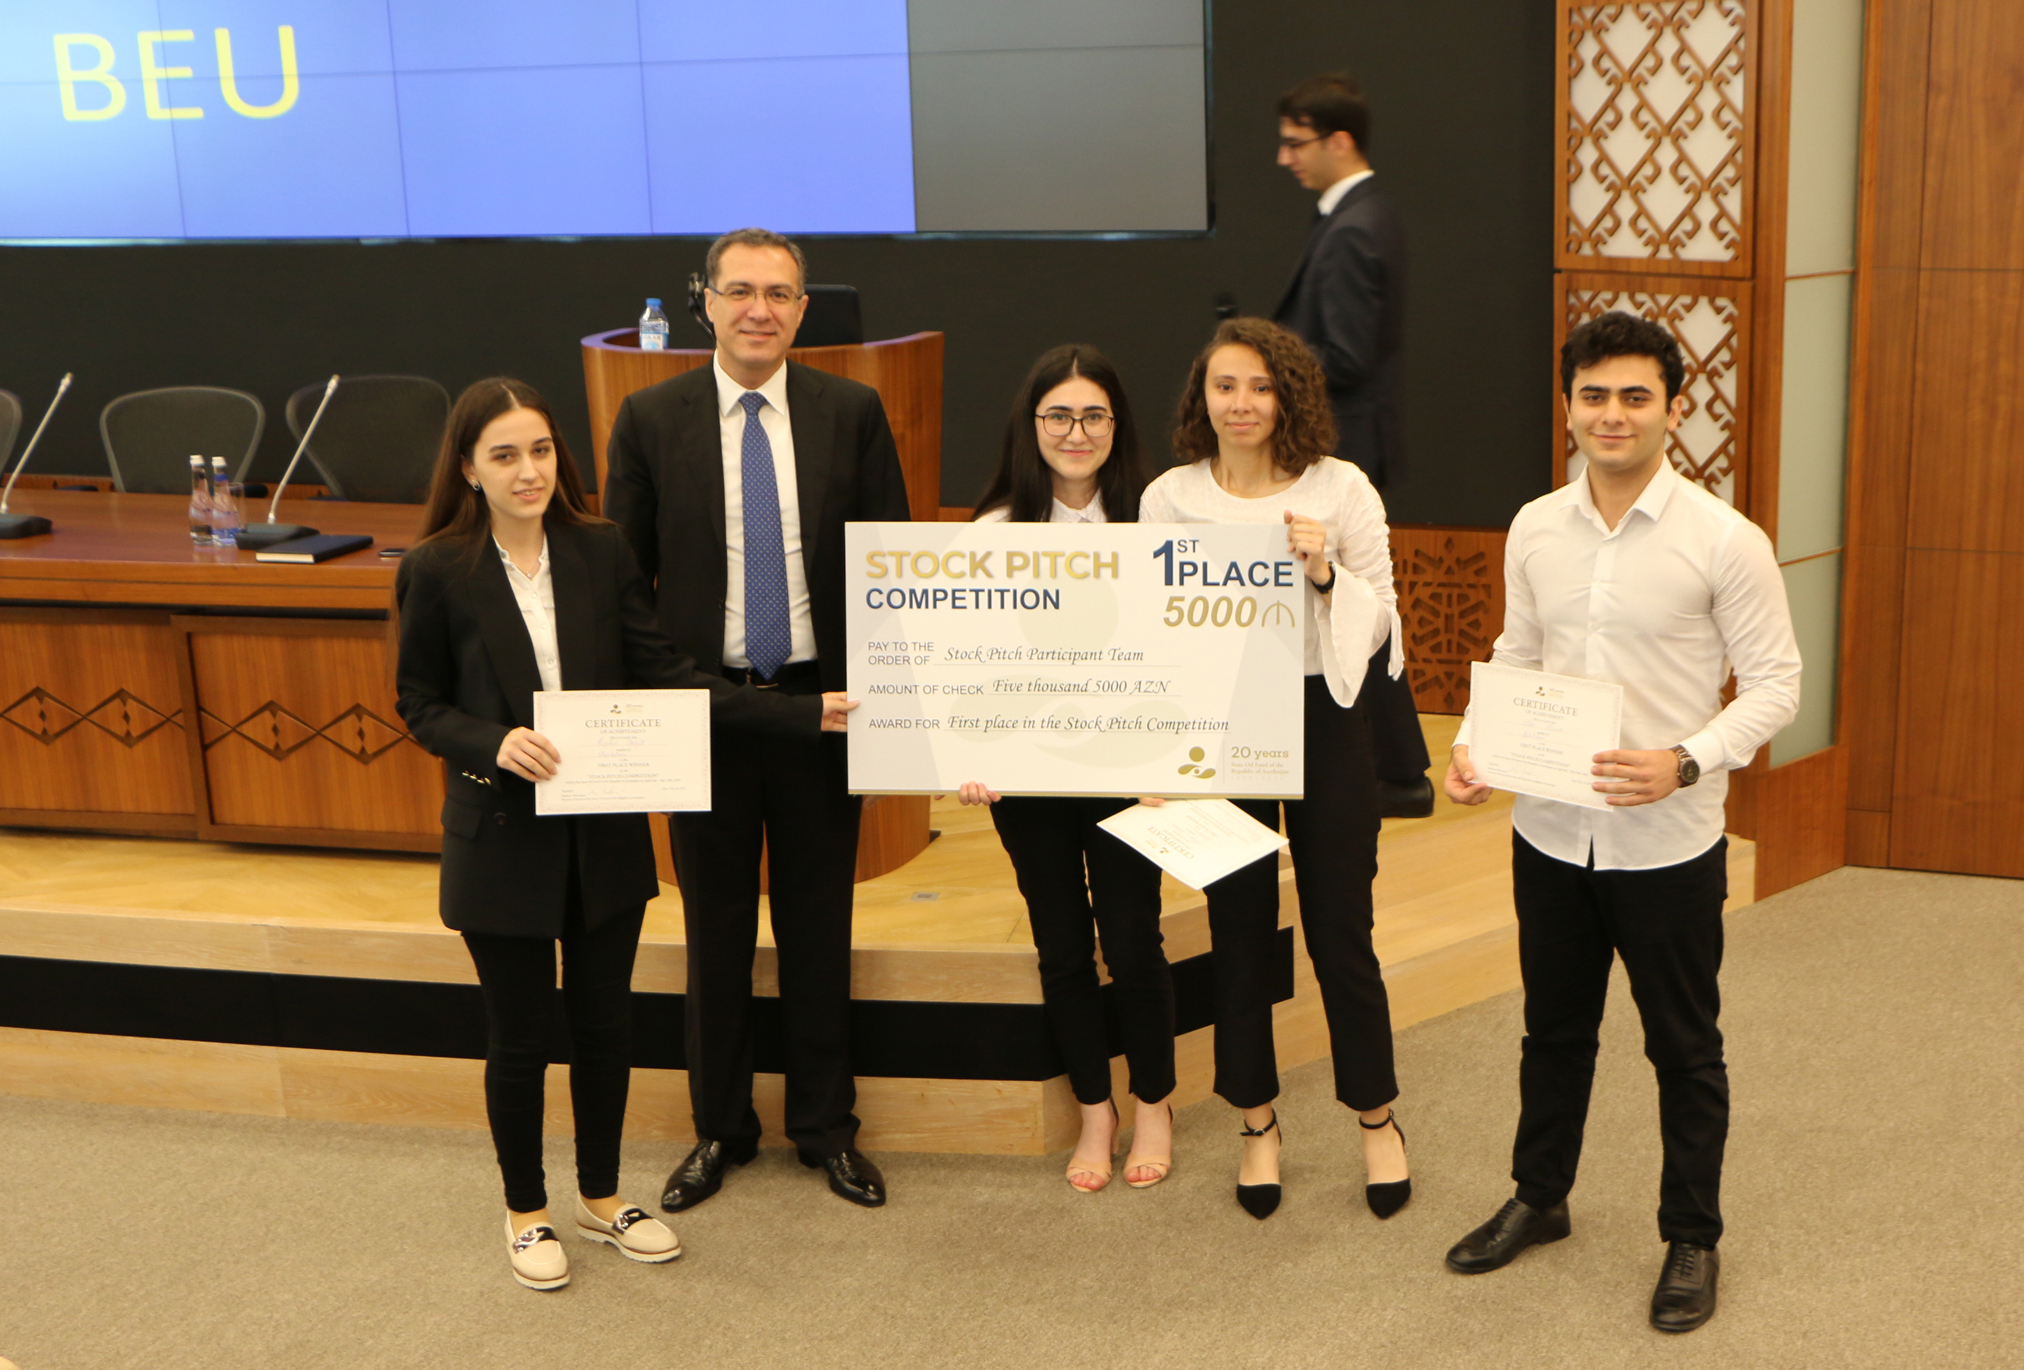 Students of the School of Economics and Management Took Third Place in “Stock Pitch” Competition Held Among Country’s Hight School Students